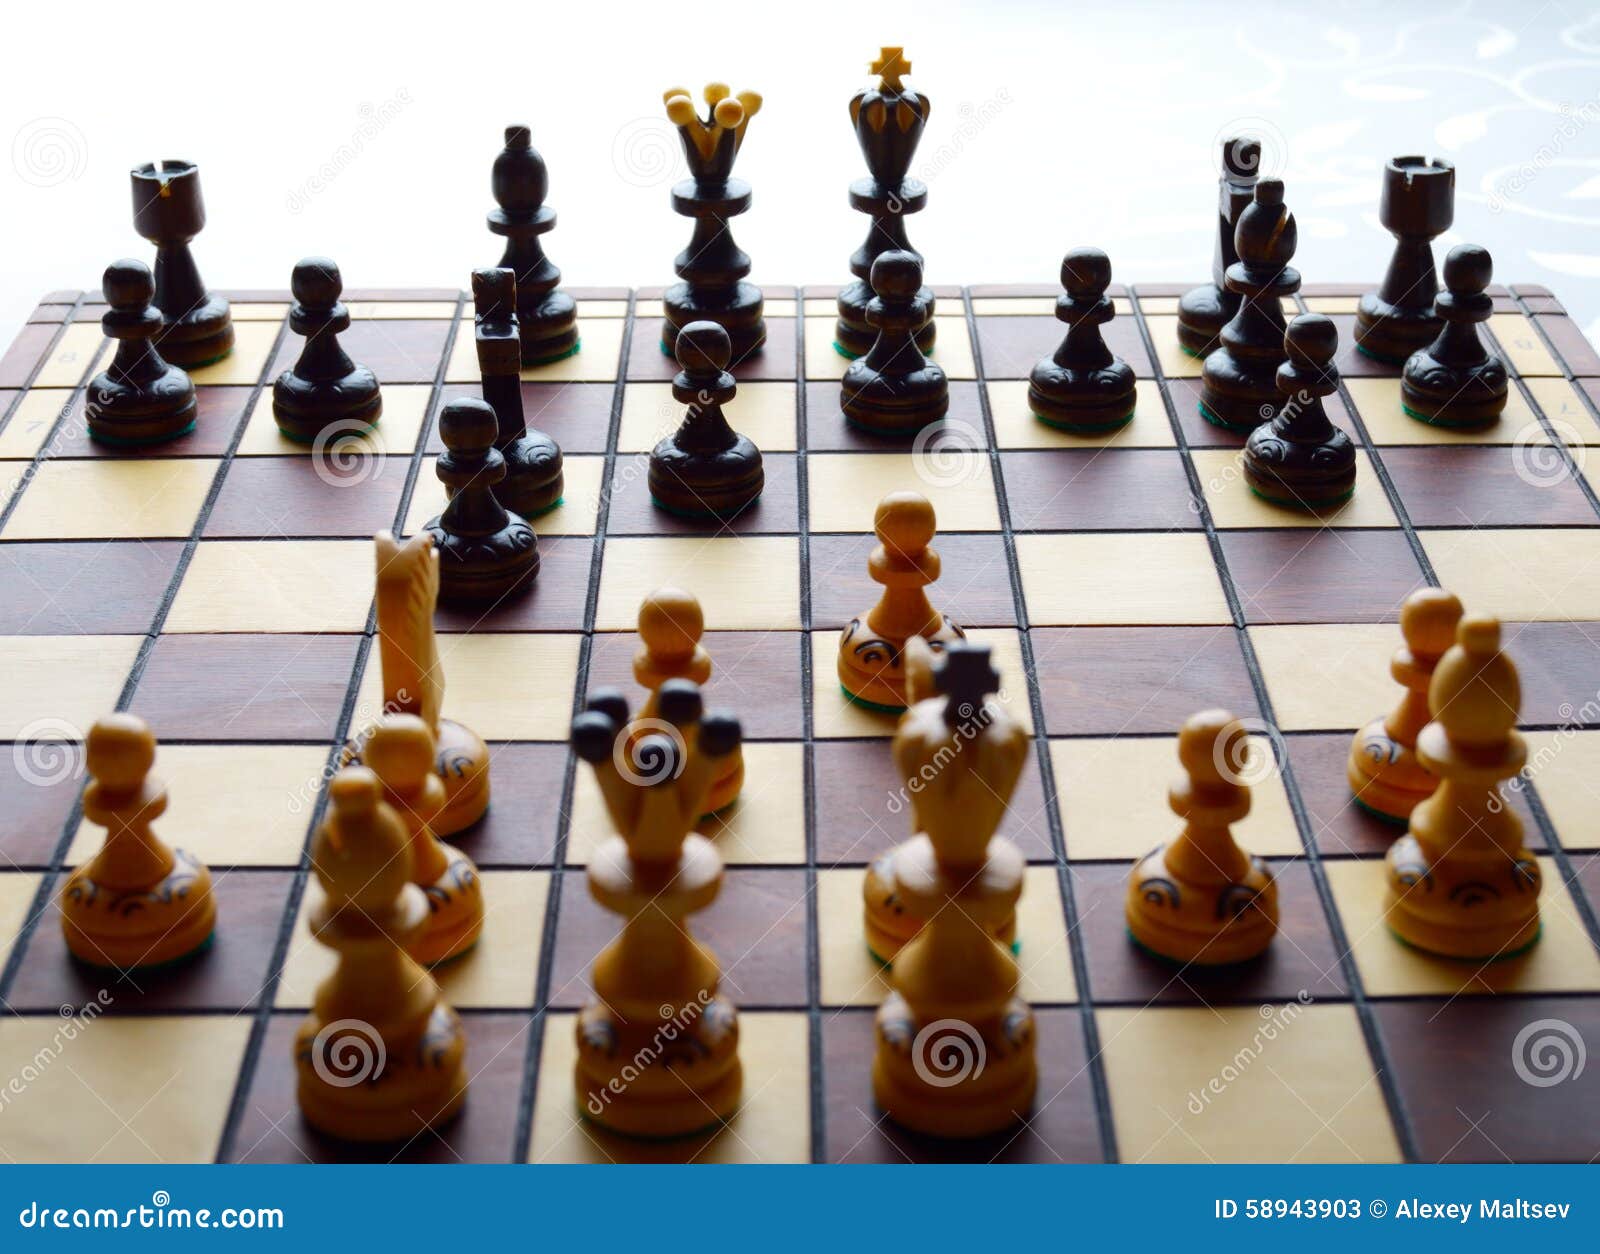 Sicilian defense in chess stock image. Image of rook - 58943903